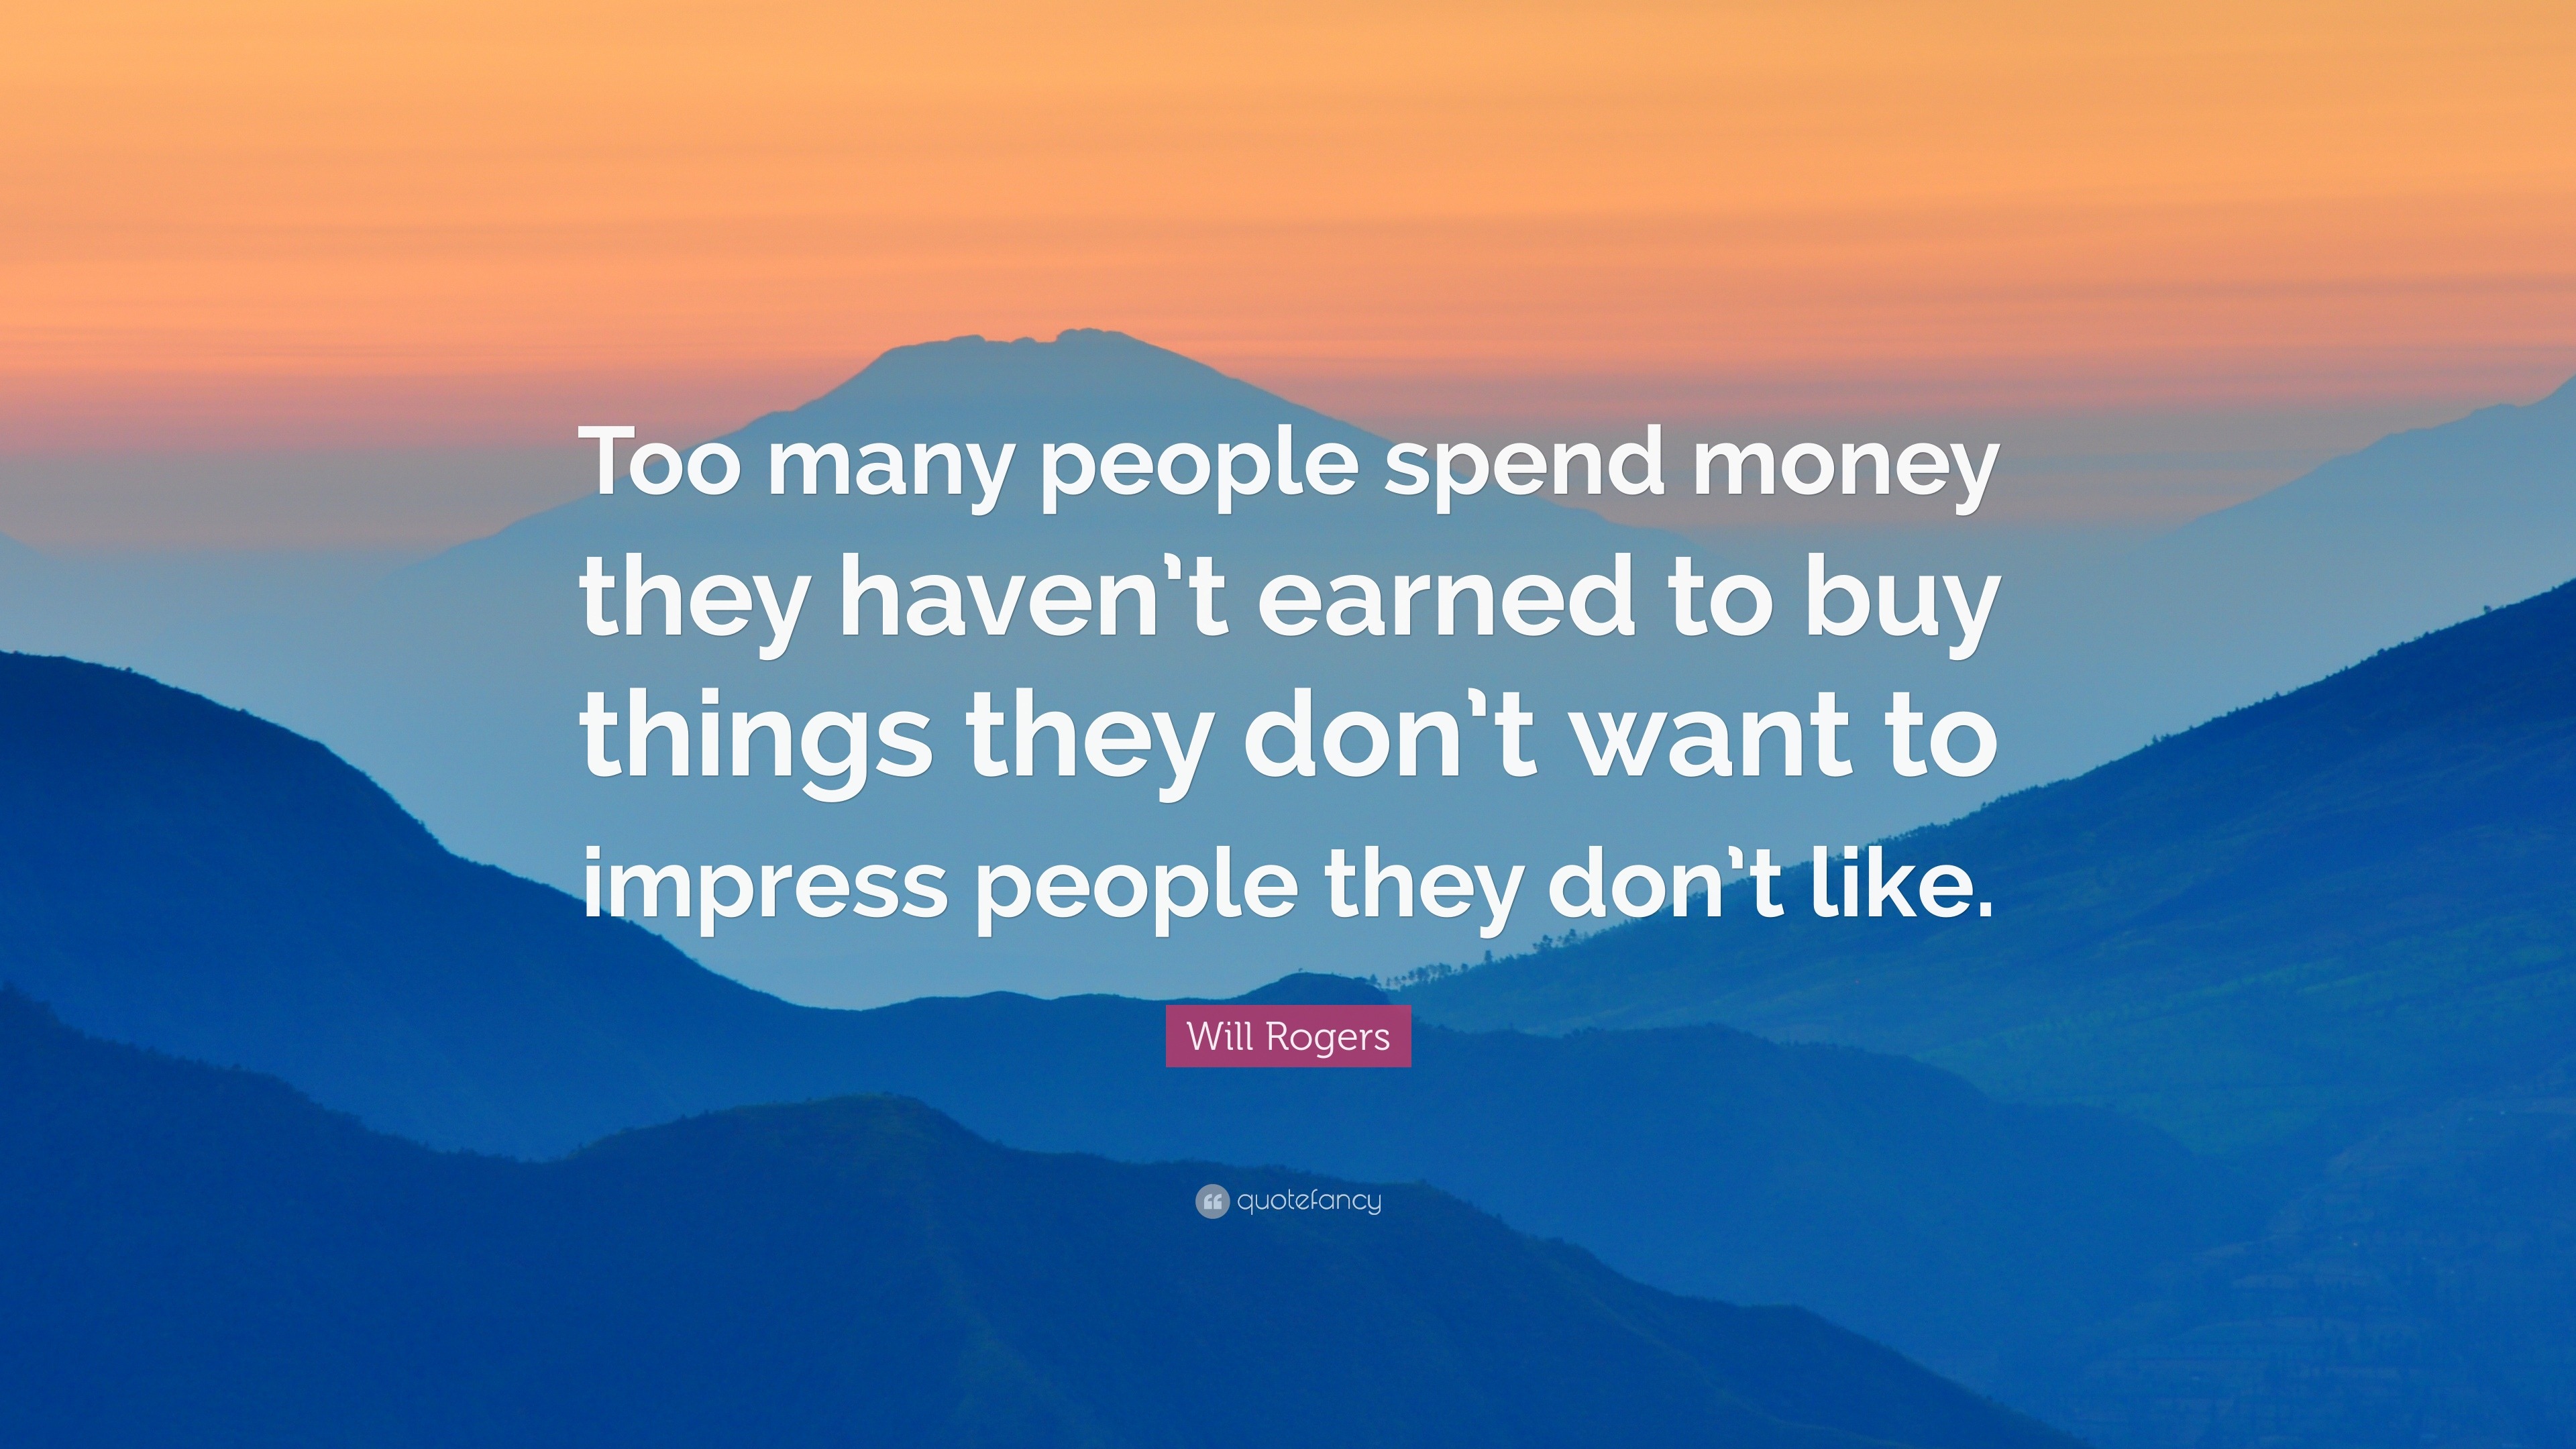 Will Rogers Quote: "Too many people spend money they haven't earned to buy things they don't ...